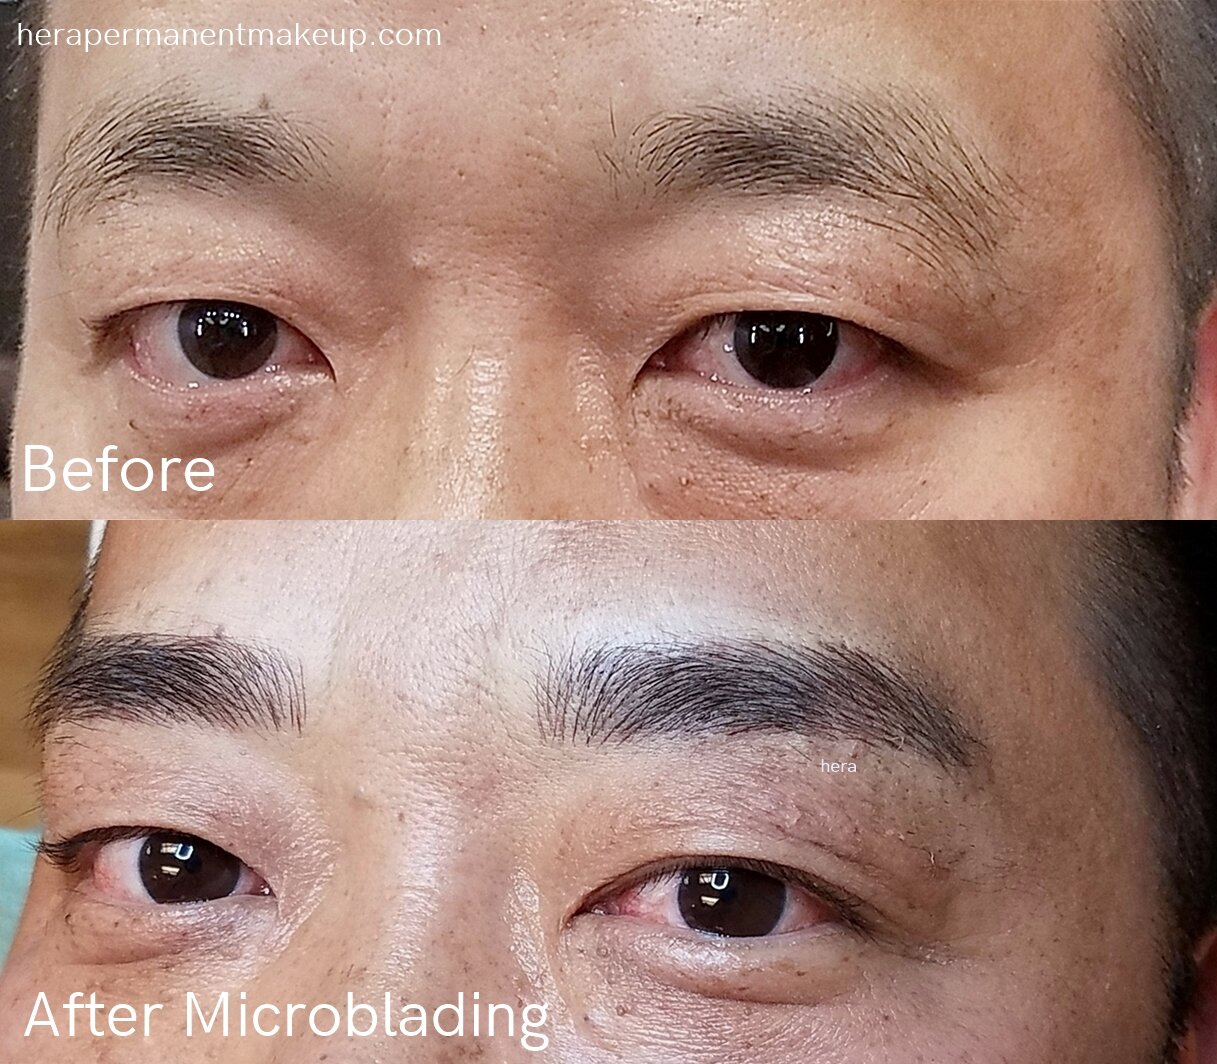 Universe Nails Spa Doreen   Mens Eyebrow Tattoo   Theres a lot  of curiosity around microblading eyebrows for men  Male Brows   MicroShading  Blossom Brows  lashes by Master Suzanne N  Facebook